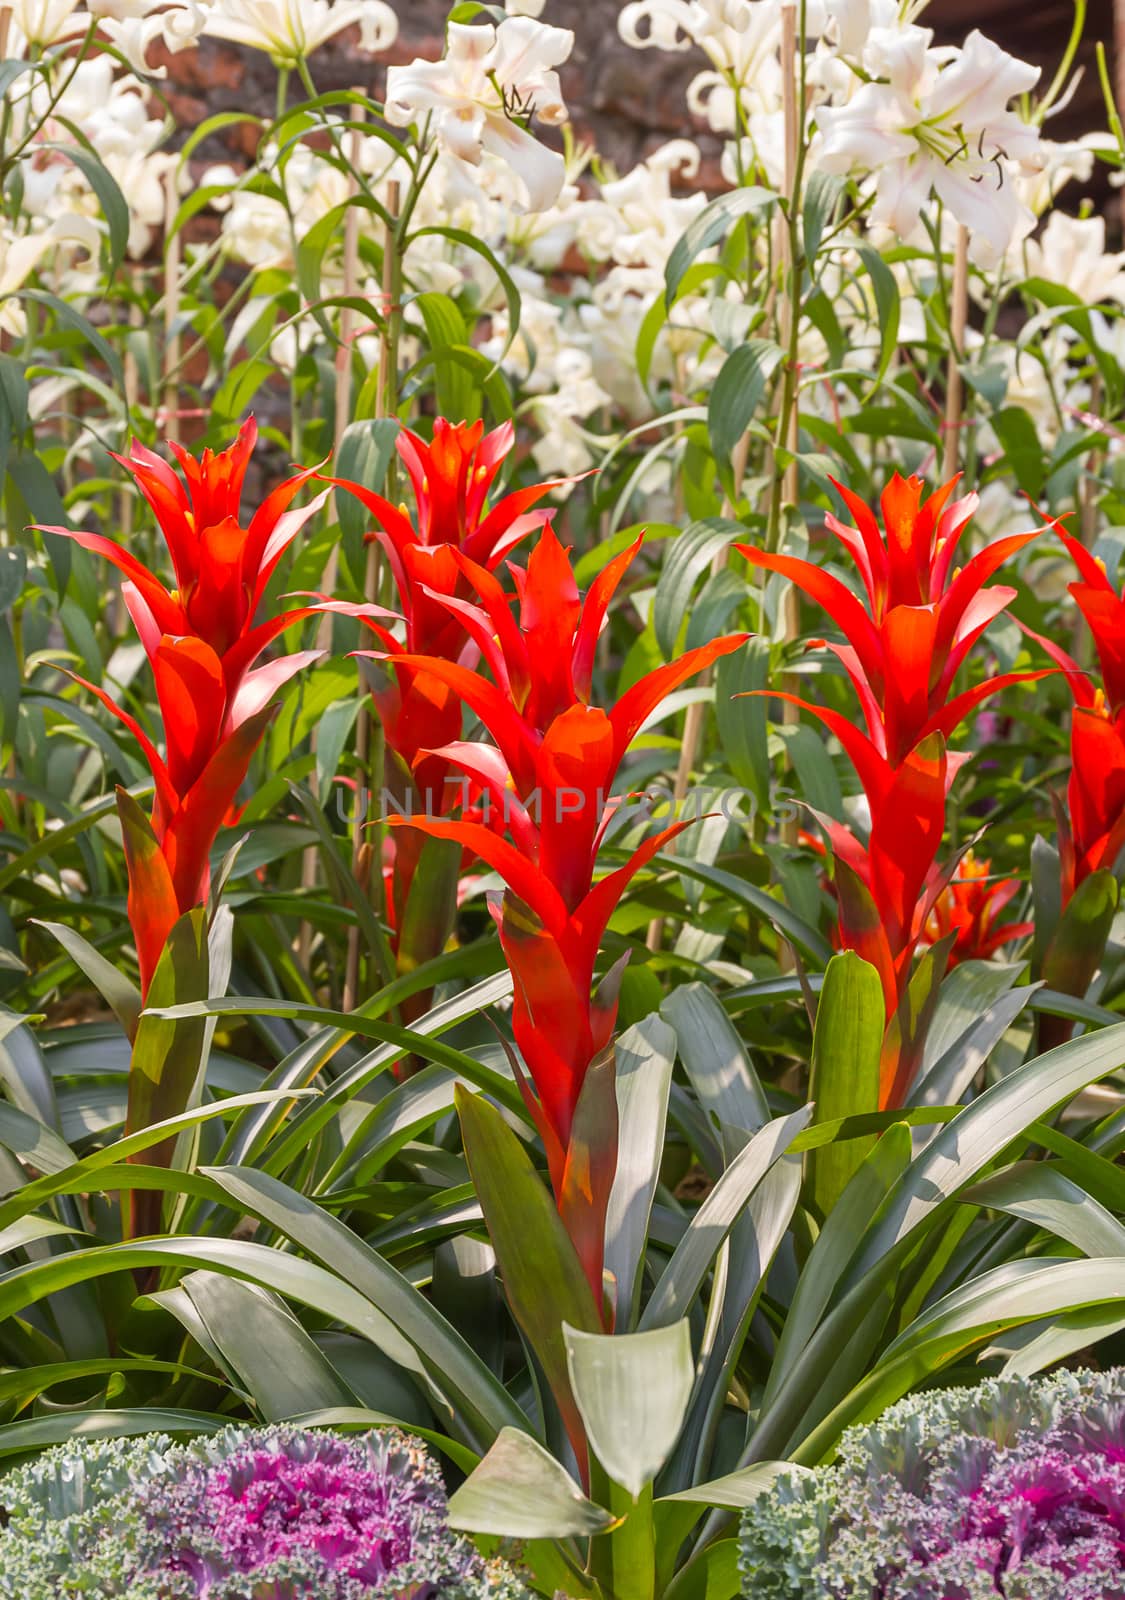 Close up Red blooming guzmania magnifica flower plants, Red guzmania magnifica flower plants in garden